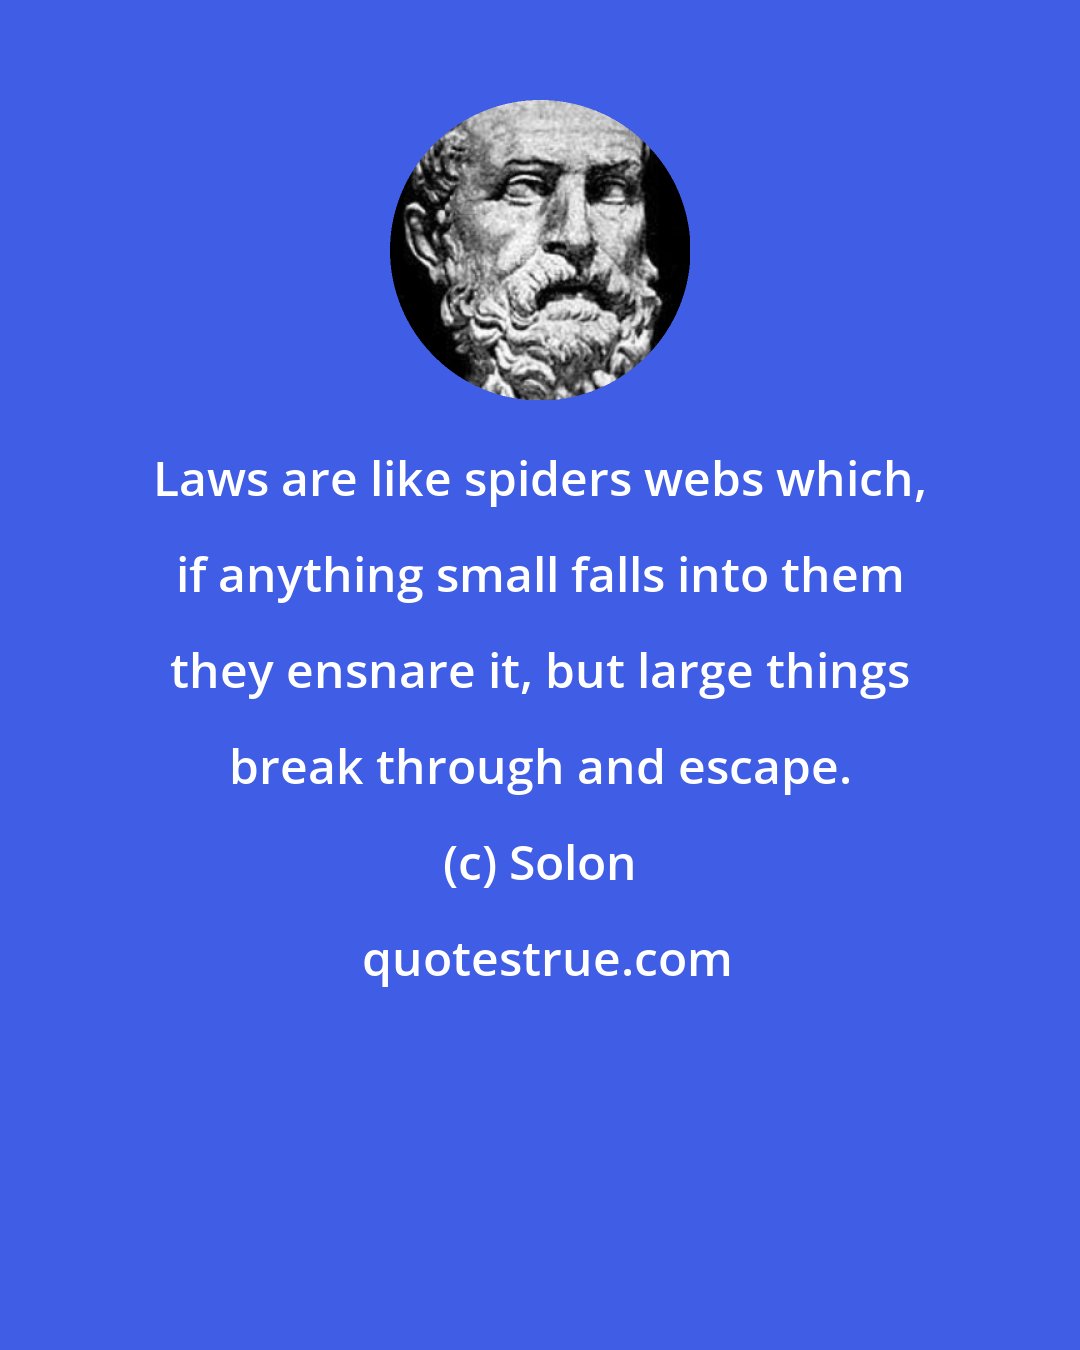 Solon: Laws are like spiders webs which, if anything small falls into them they ensnare it, but large things break through and escape.